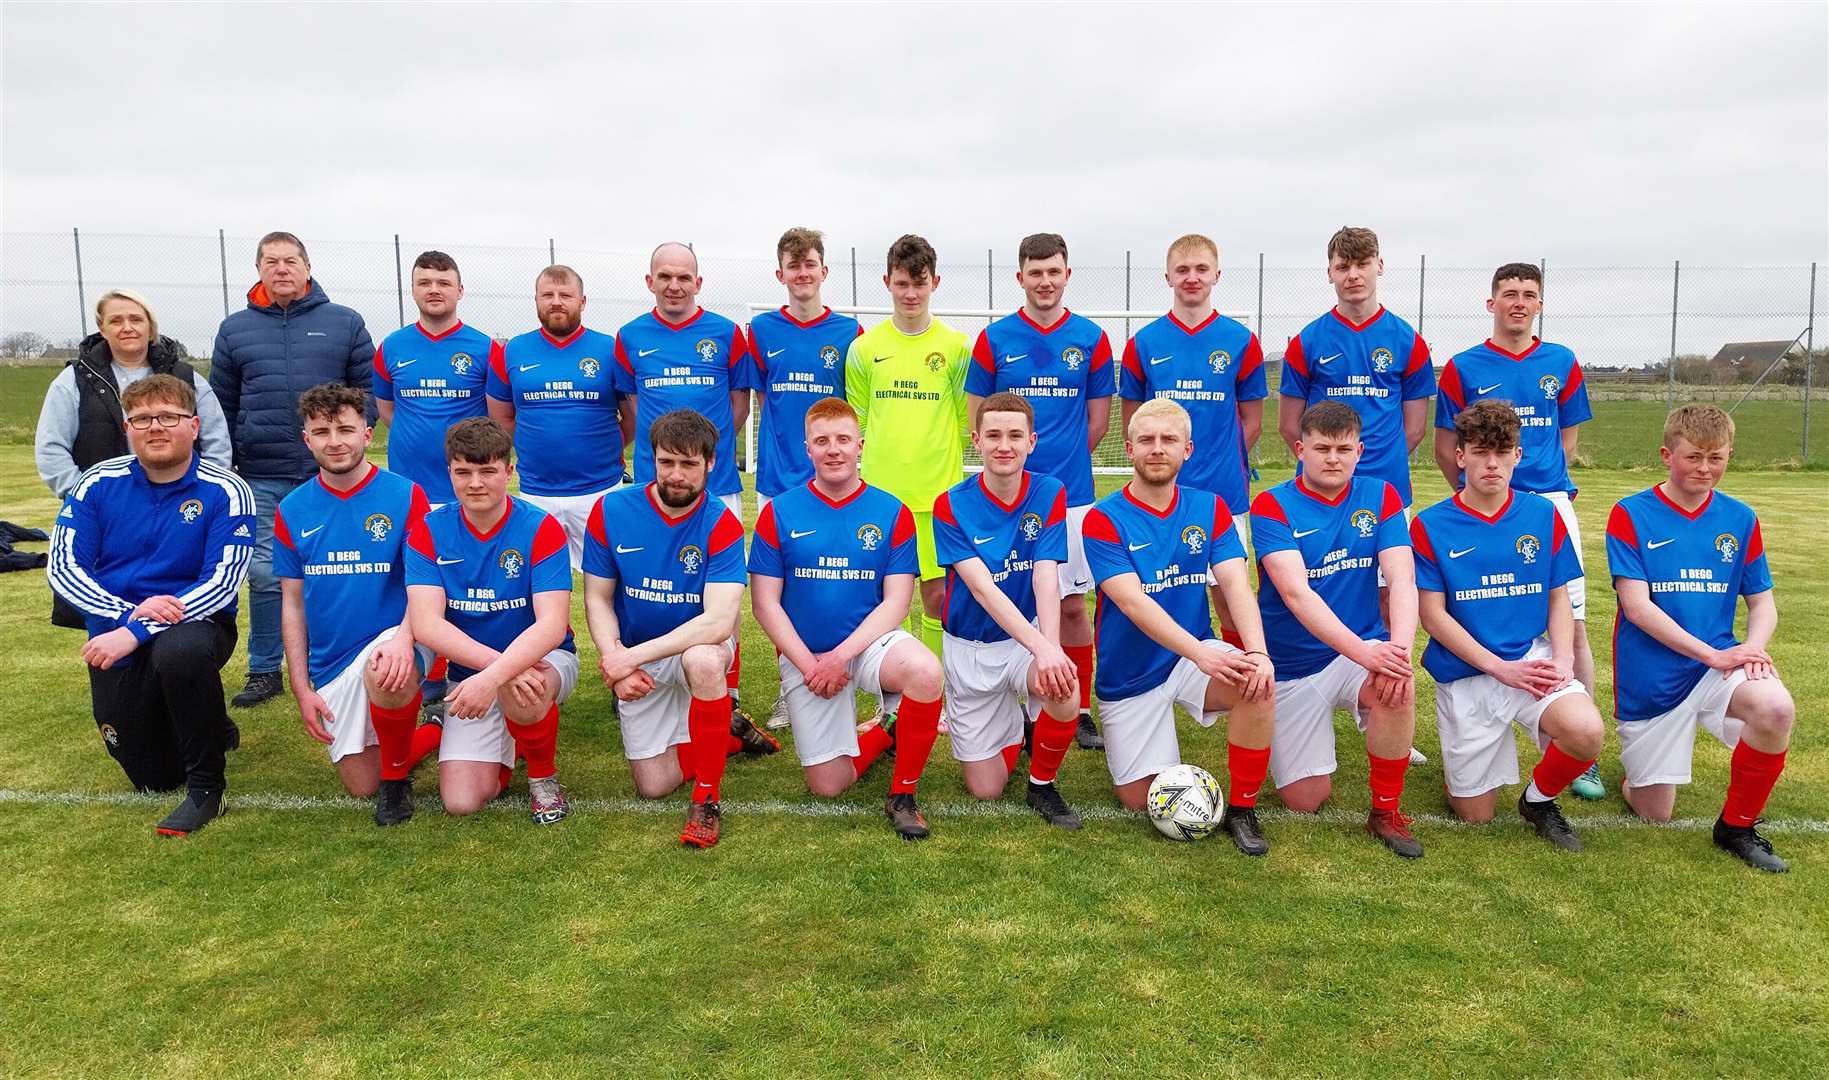 Keiss received a new home kit before Saturday's Highland Amateur Cup tie against Brora Wanderers in Dunnet. It has again been sponsored by R Begg Electrical, and club officials say they are grateful to Robbie and Catherine Begg for their continued support. Picture: Angus Mackay / Keiss FC